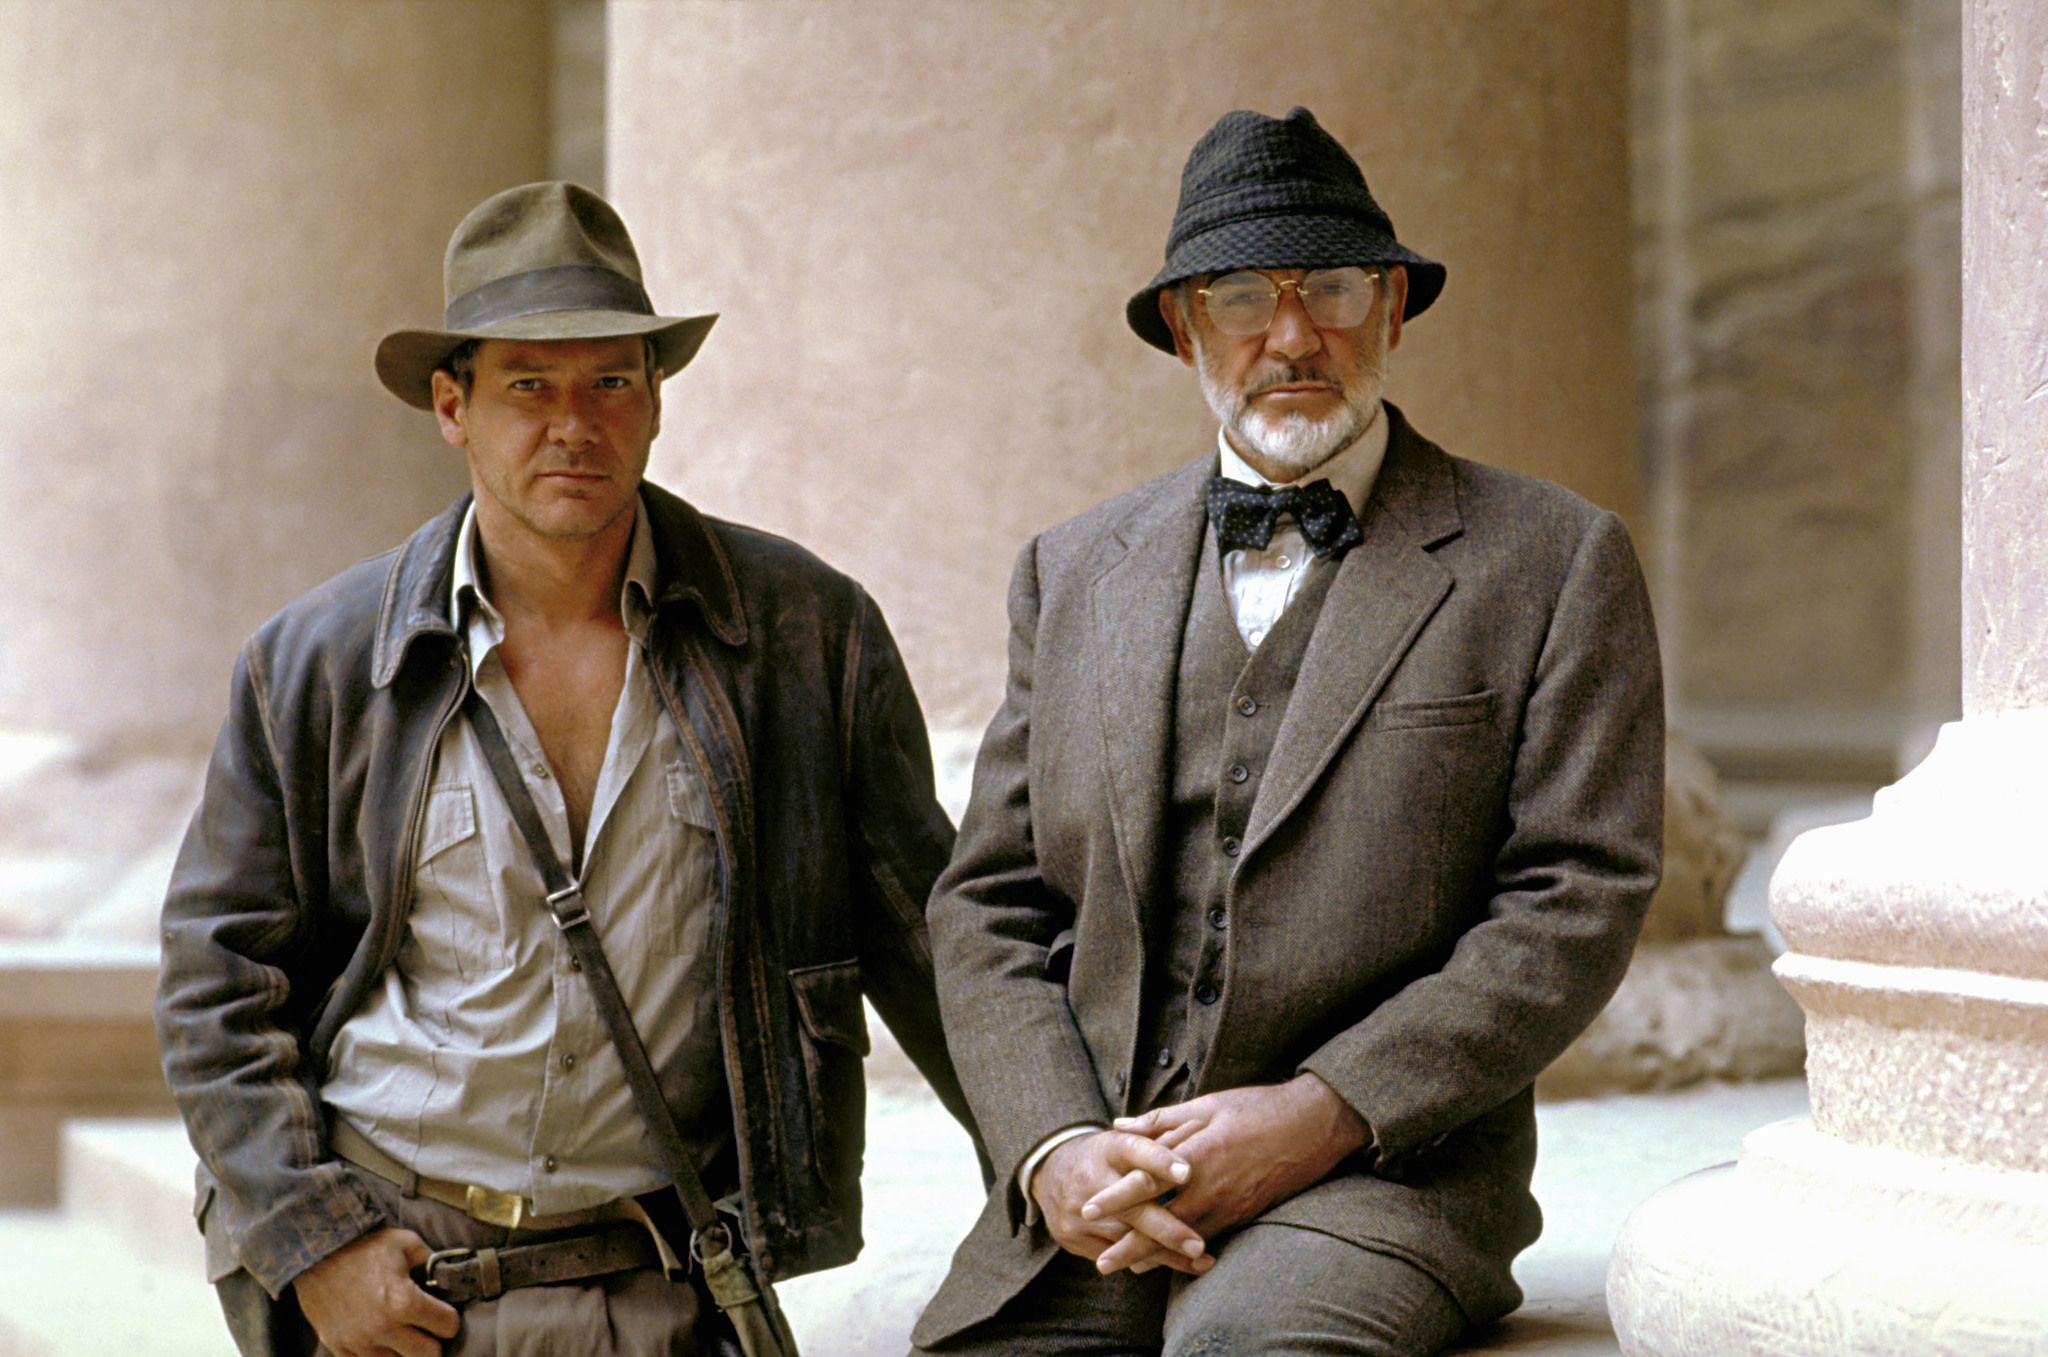 Harrison Ford and Sean Connery in "Indiana Jones and the Last Crusade"